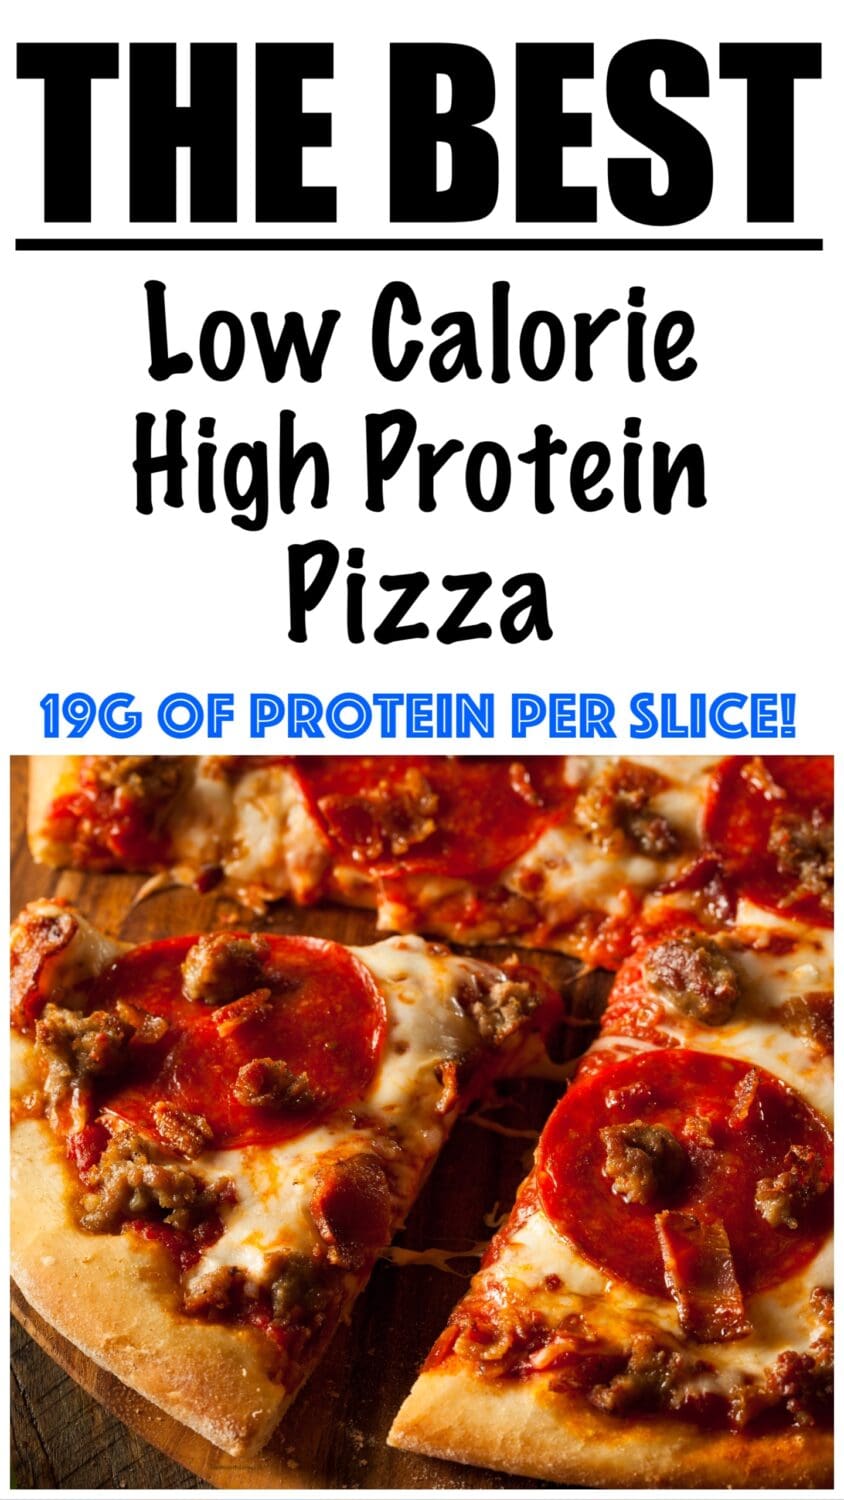 Low Calorie High Protein Pizza